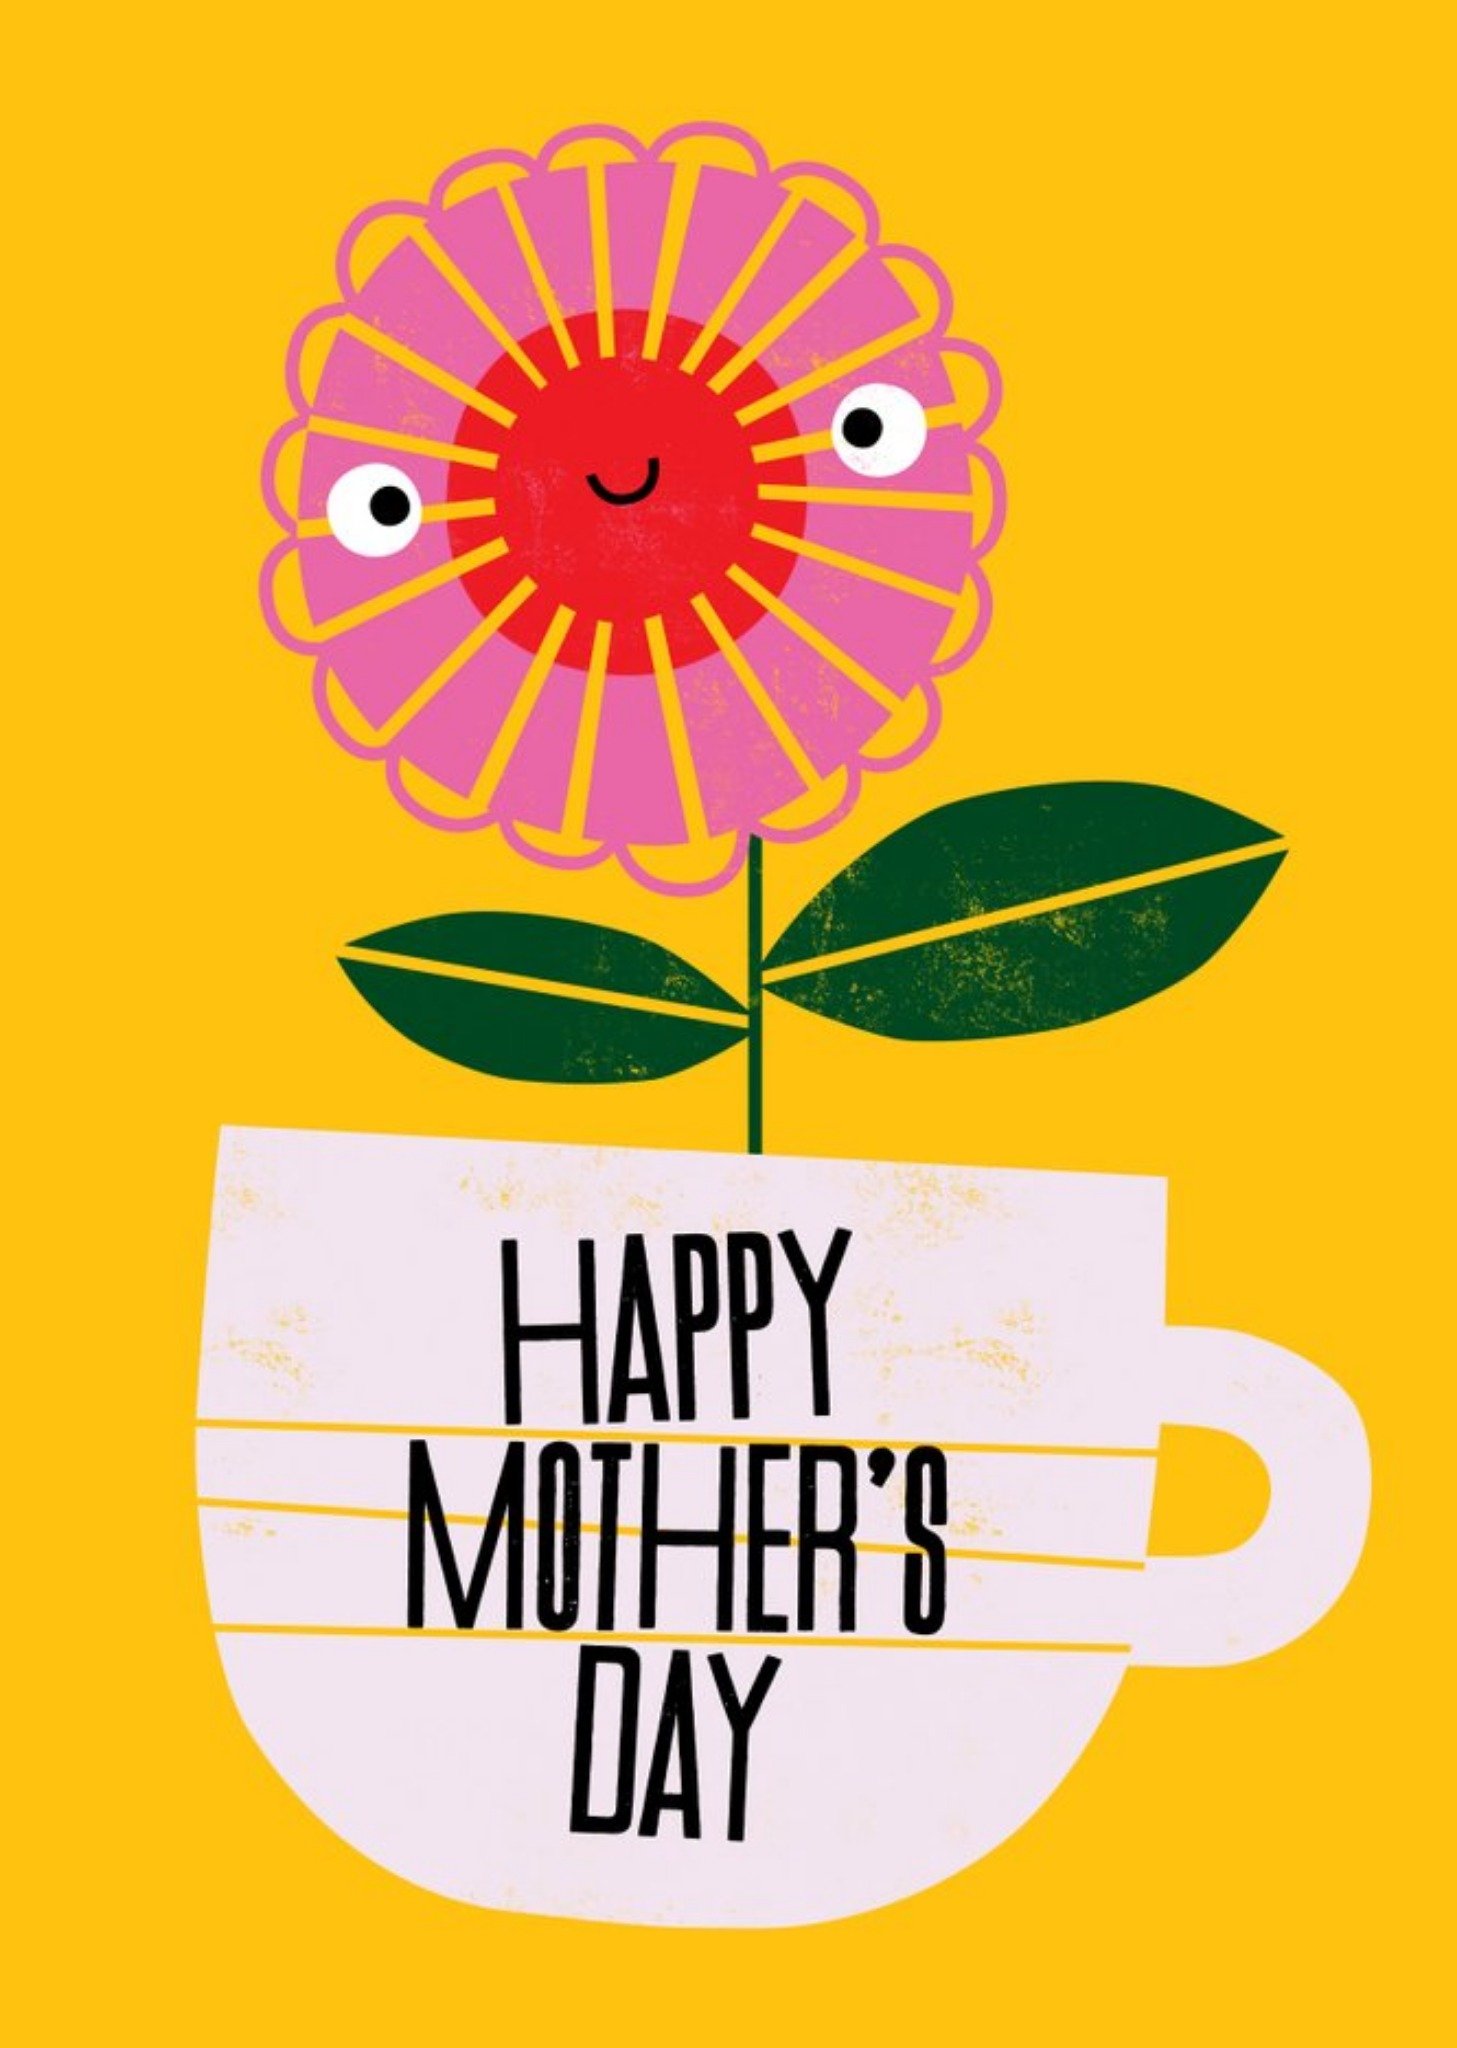 Moonpig Kate Smith Co. Flower In Tea Cup Mother's Day Card Ecard